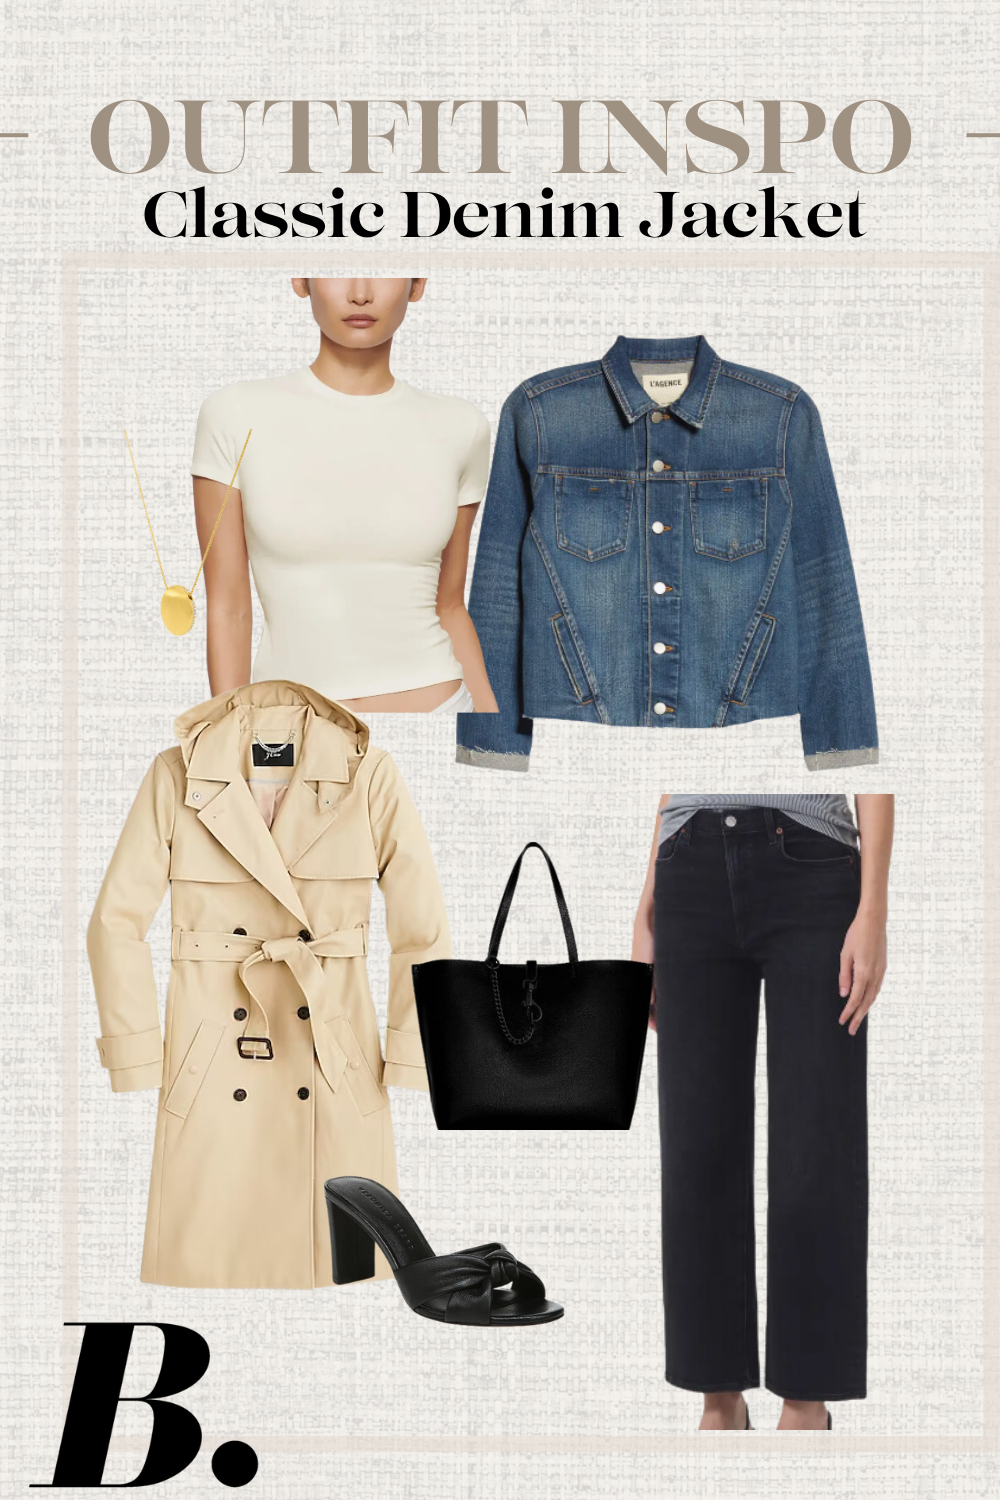 Classic Denim Jacket and trench coat